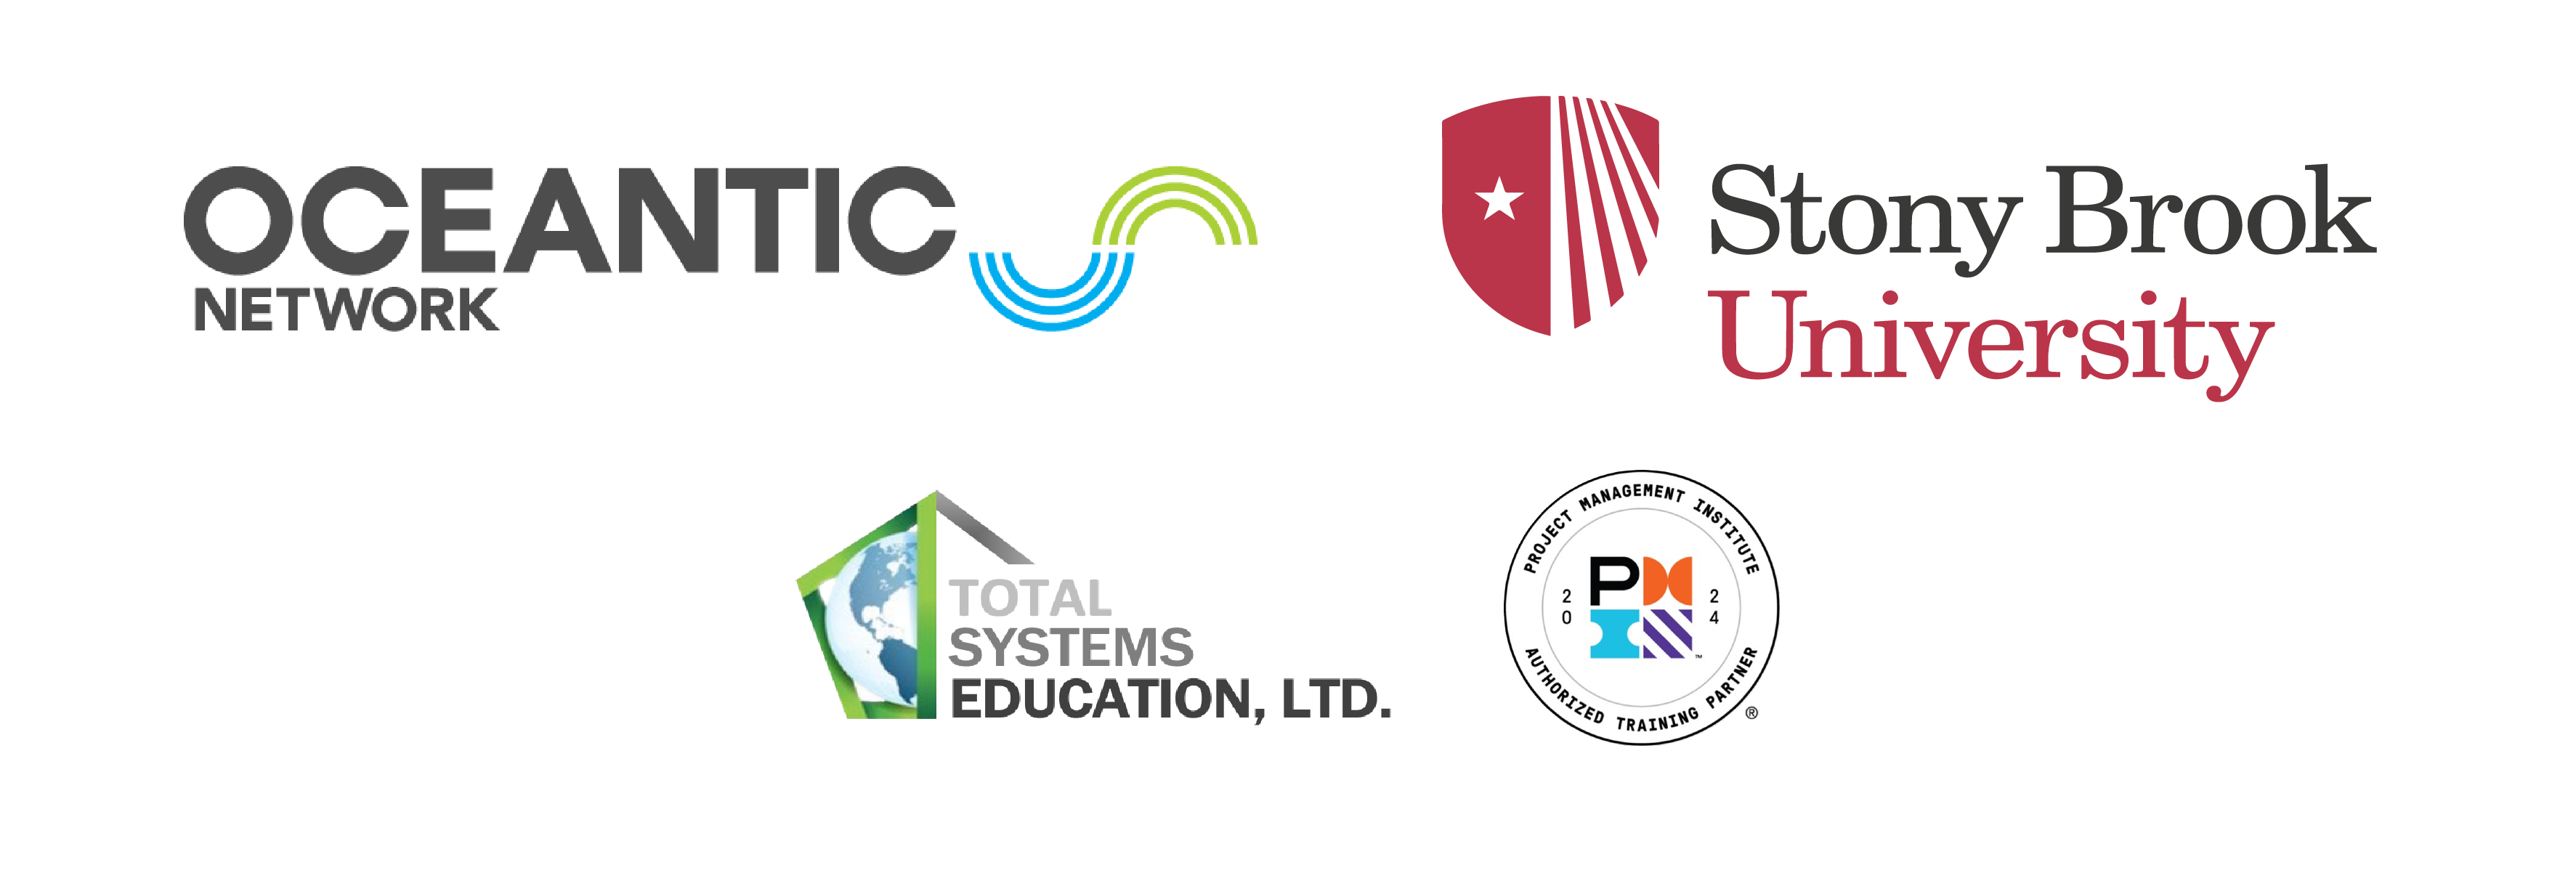 PMI, Stony Brook Univ, Oceanic Network, Total Systems logos